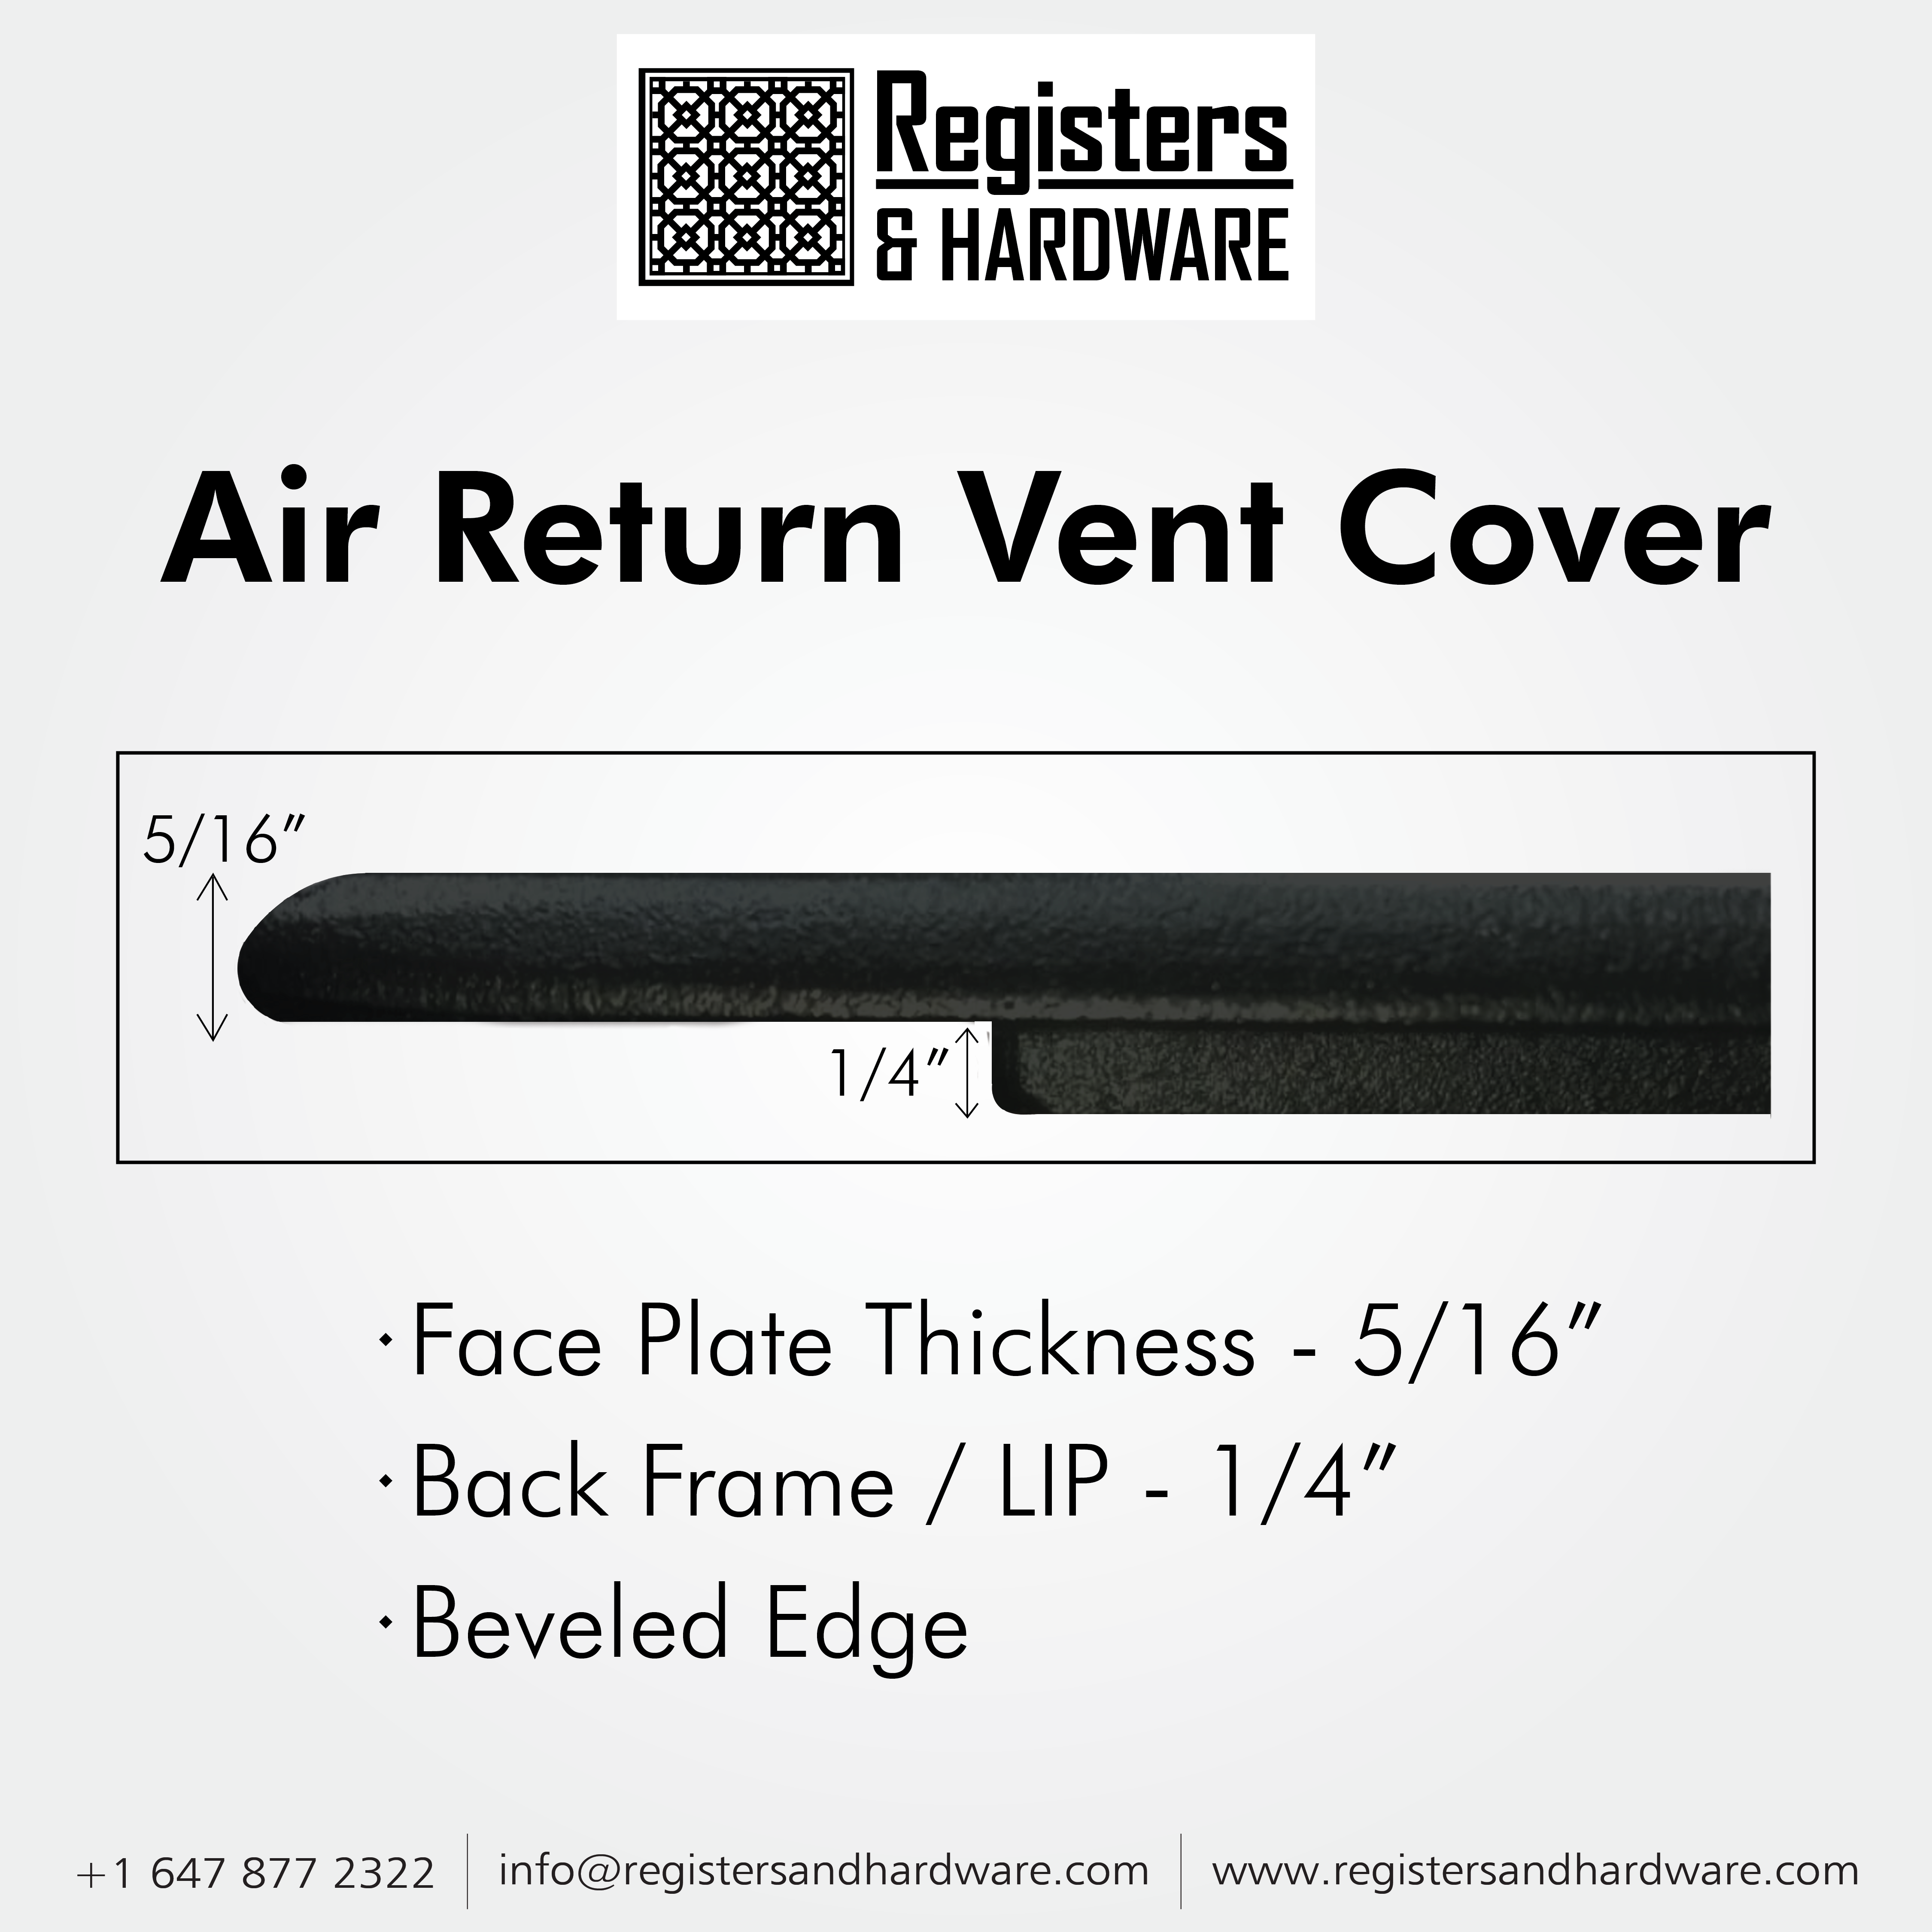 Achtek AIR RETURN 20"x30" Duct Opening (Overall Size 22"x32") | Heavy Cast Aluminum Air Grille HVAC Duct || Powder Coated